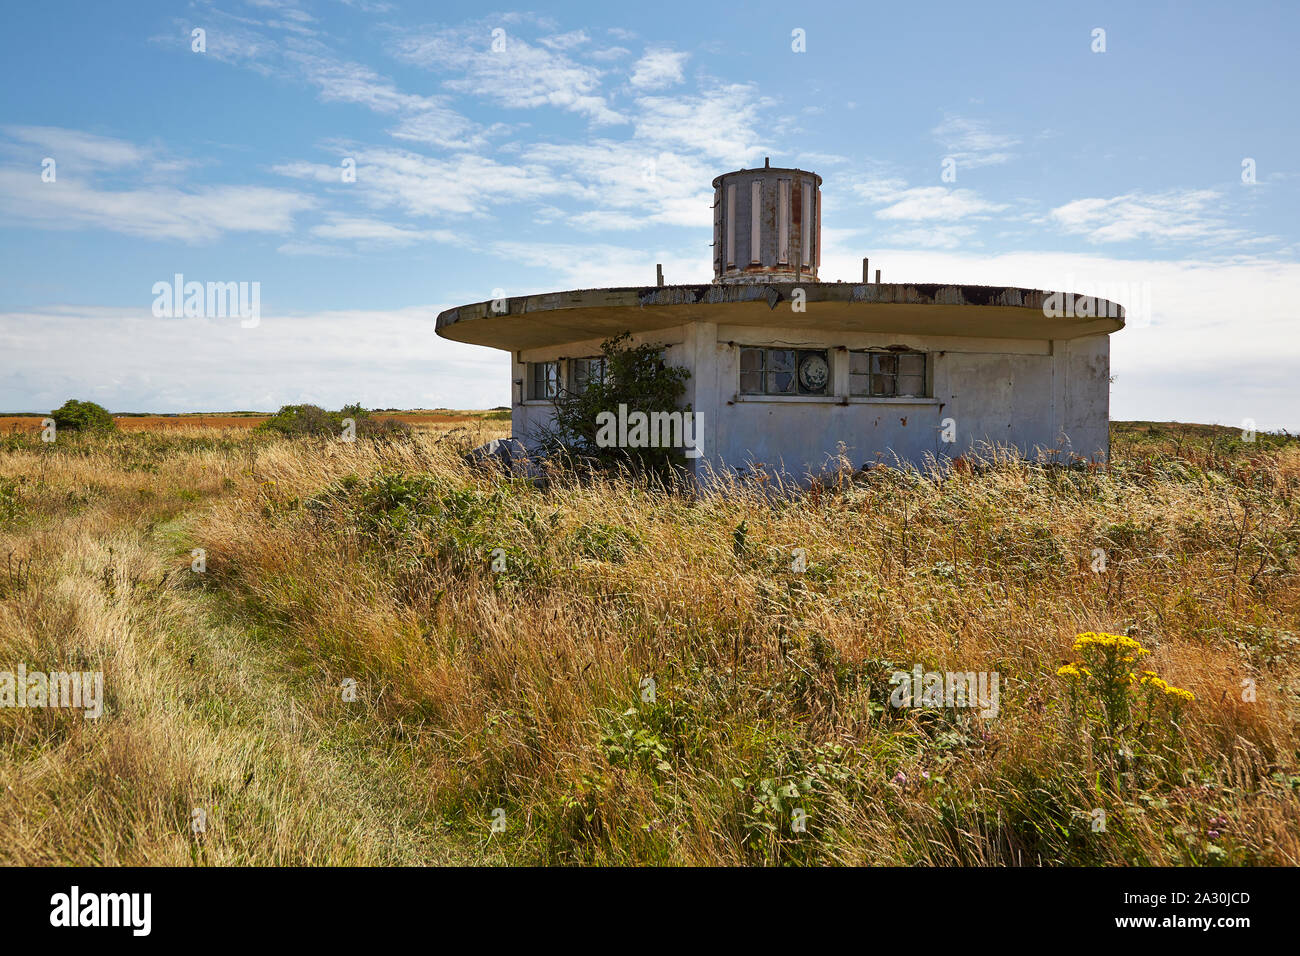 Disused concrete navigation building located in the former WW II German Concentration camp SS Lager Sylt on the island of Alderney, Channel Islands Stock Photo